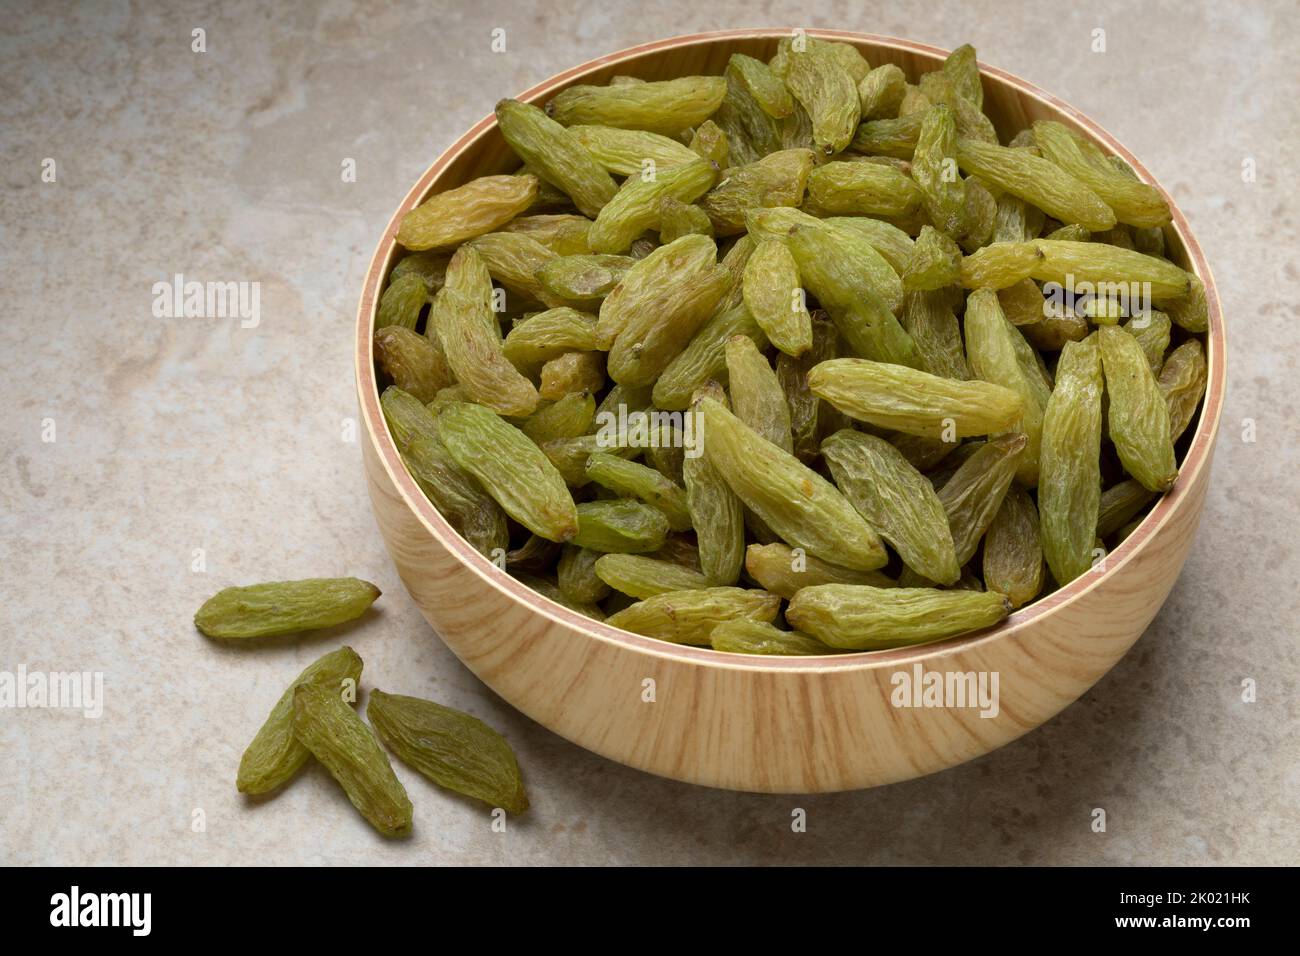 Bowl with green sweet Afghans raisins close up Stock Photo